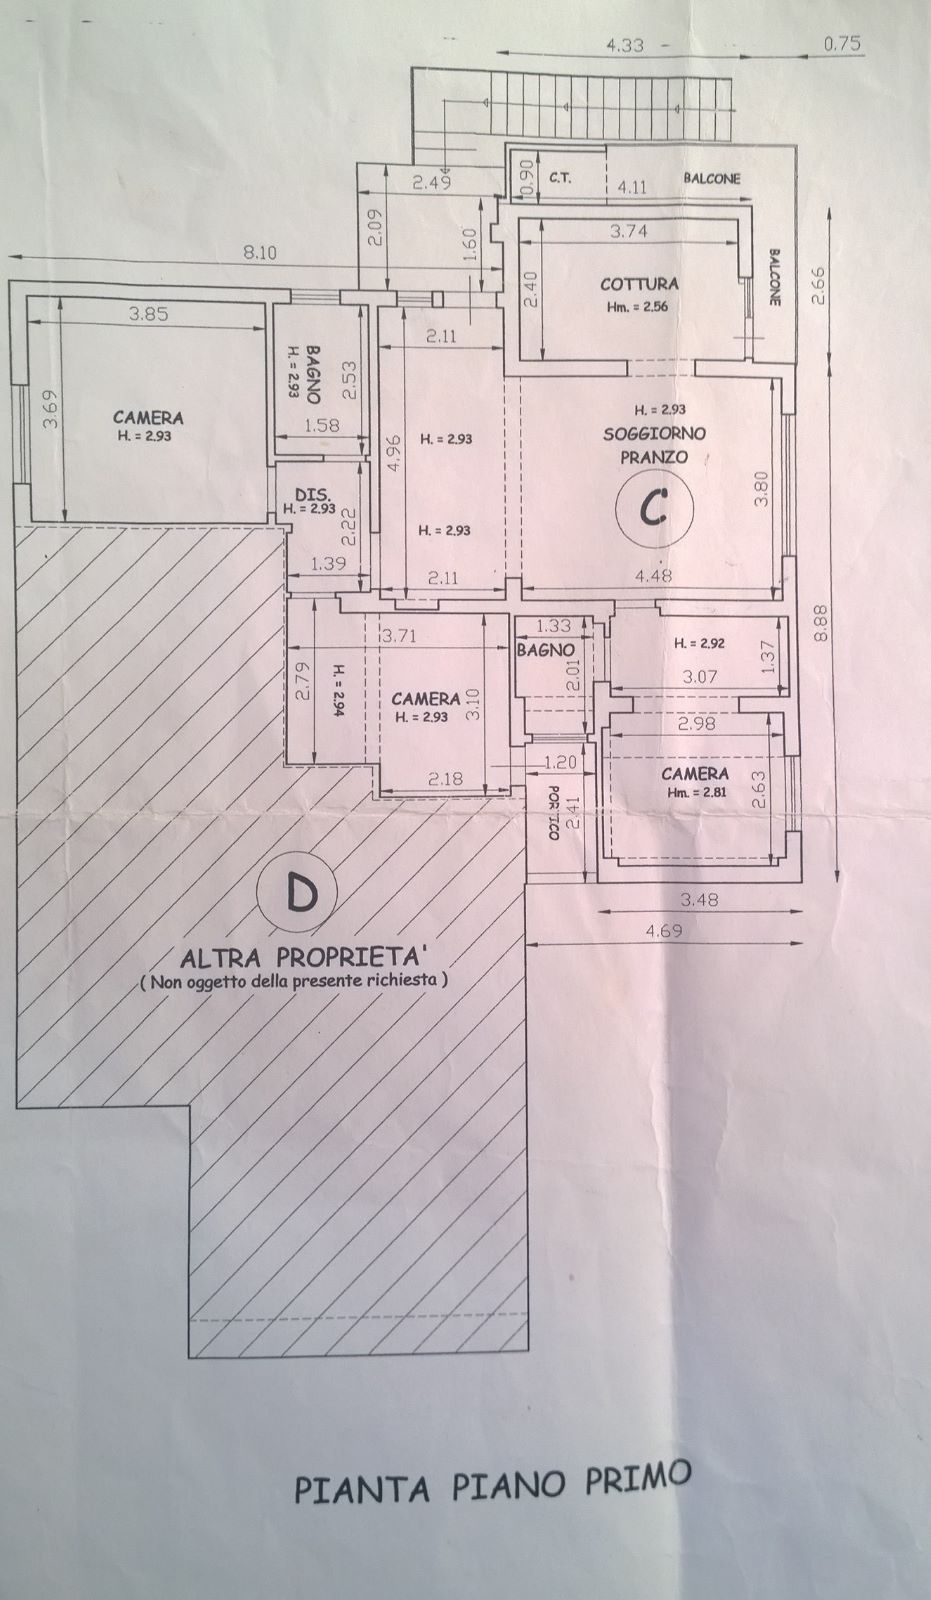 Apartment for sale, ref. 28096 (Plan 1/1)